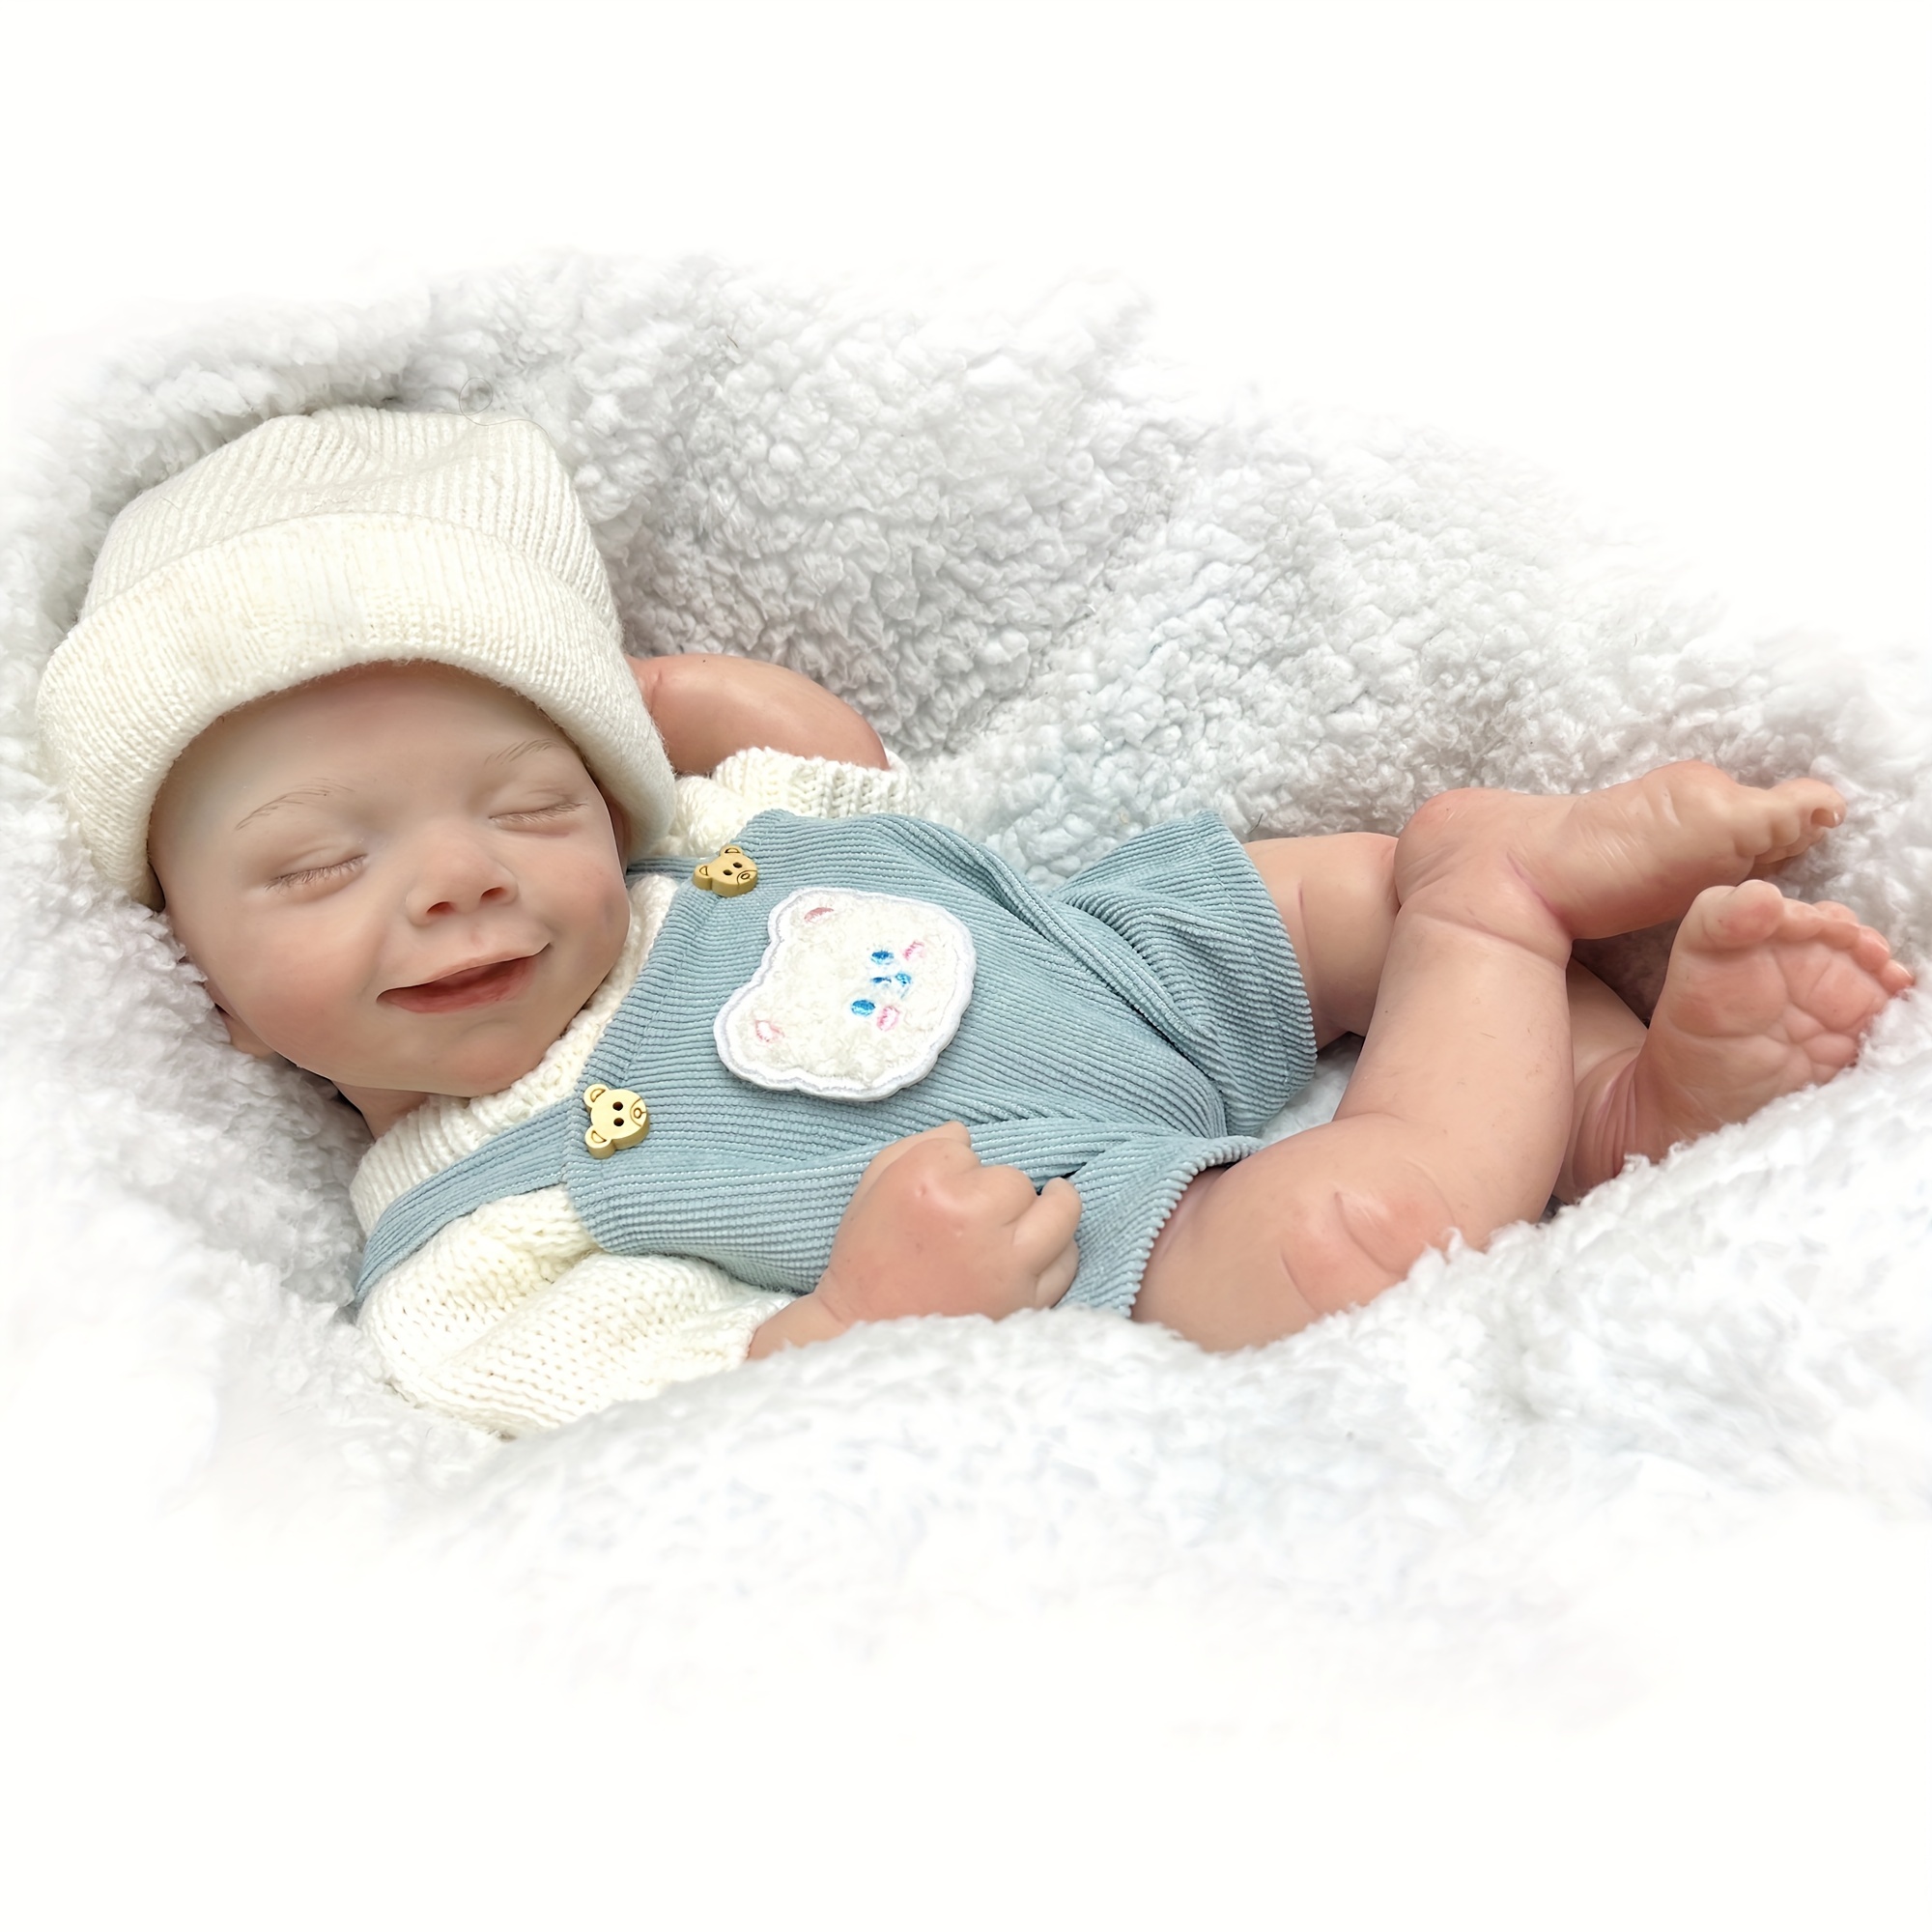 16.93inch Whole Body Solid Silicone Bebe Reborn Girl With Artist Oil  Painted Skin Soft Platinum Silicone Reborn Baby Doll Can Bath Reborn Doll  Toy For